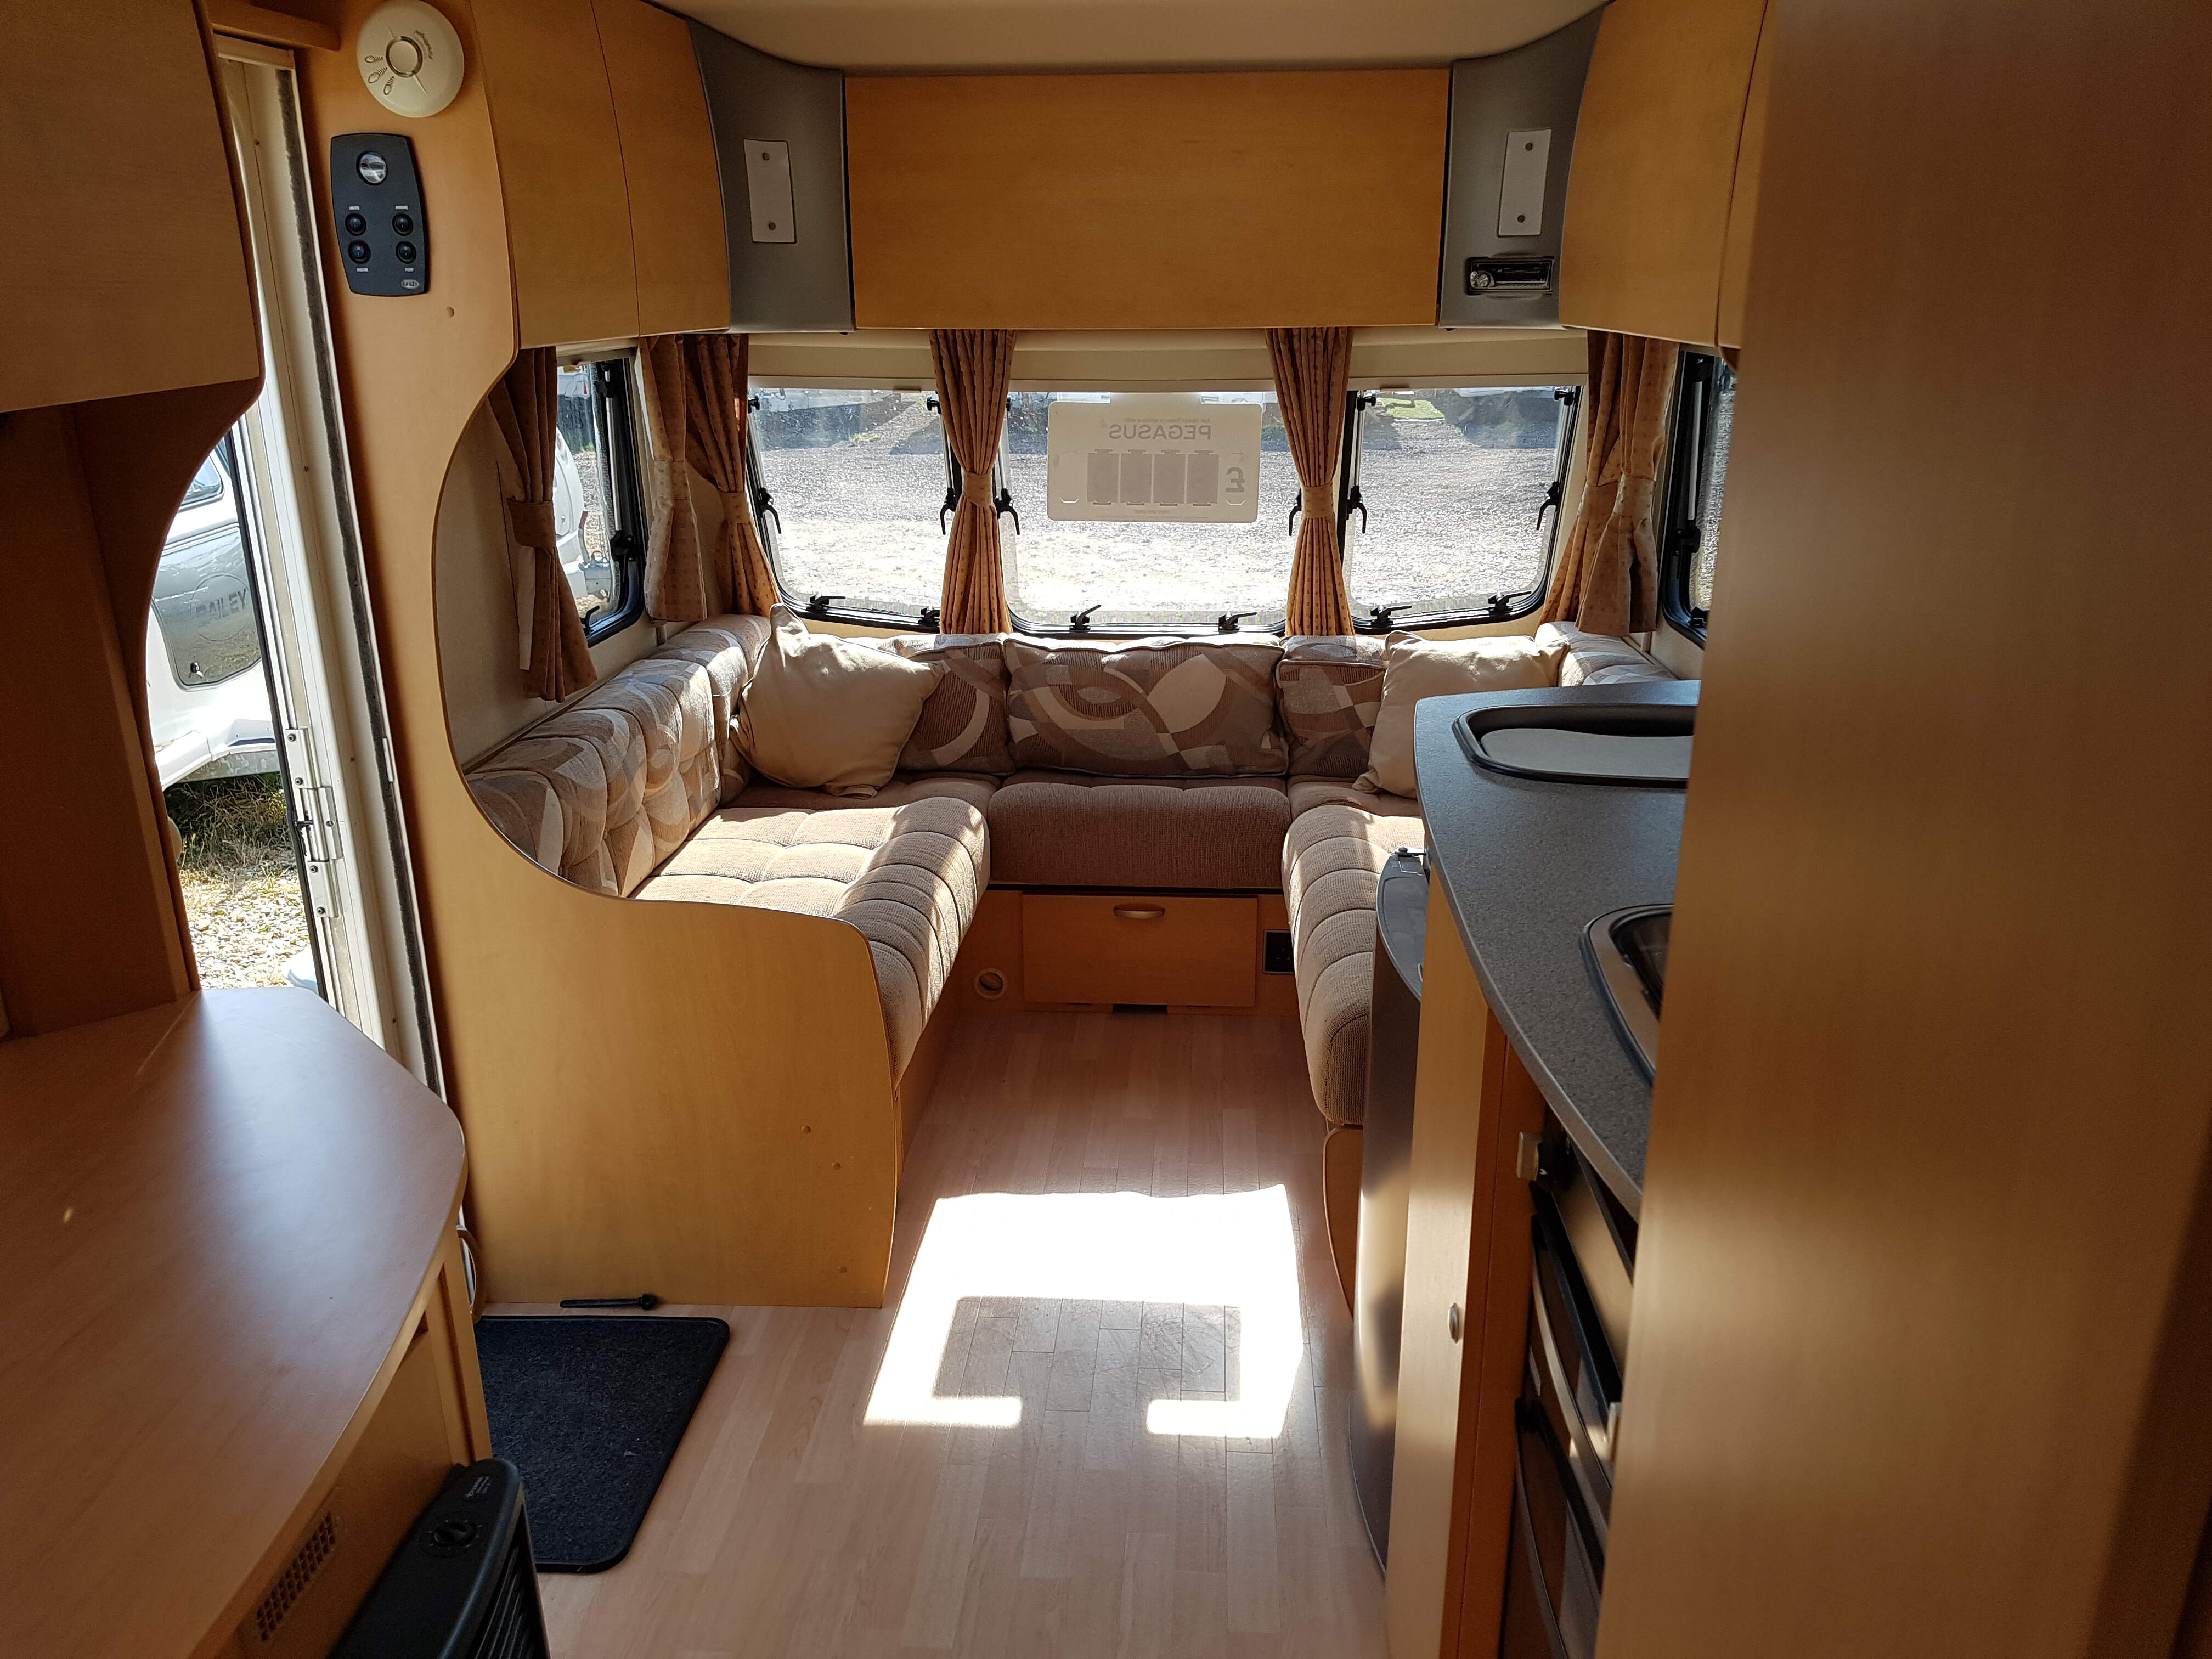 NOW SOLD 2009 Bailey Ranger GT60 520-4, 4 Berth FIXED BED Lightweight Caravan with Motor Mover